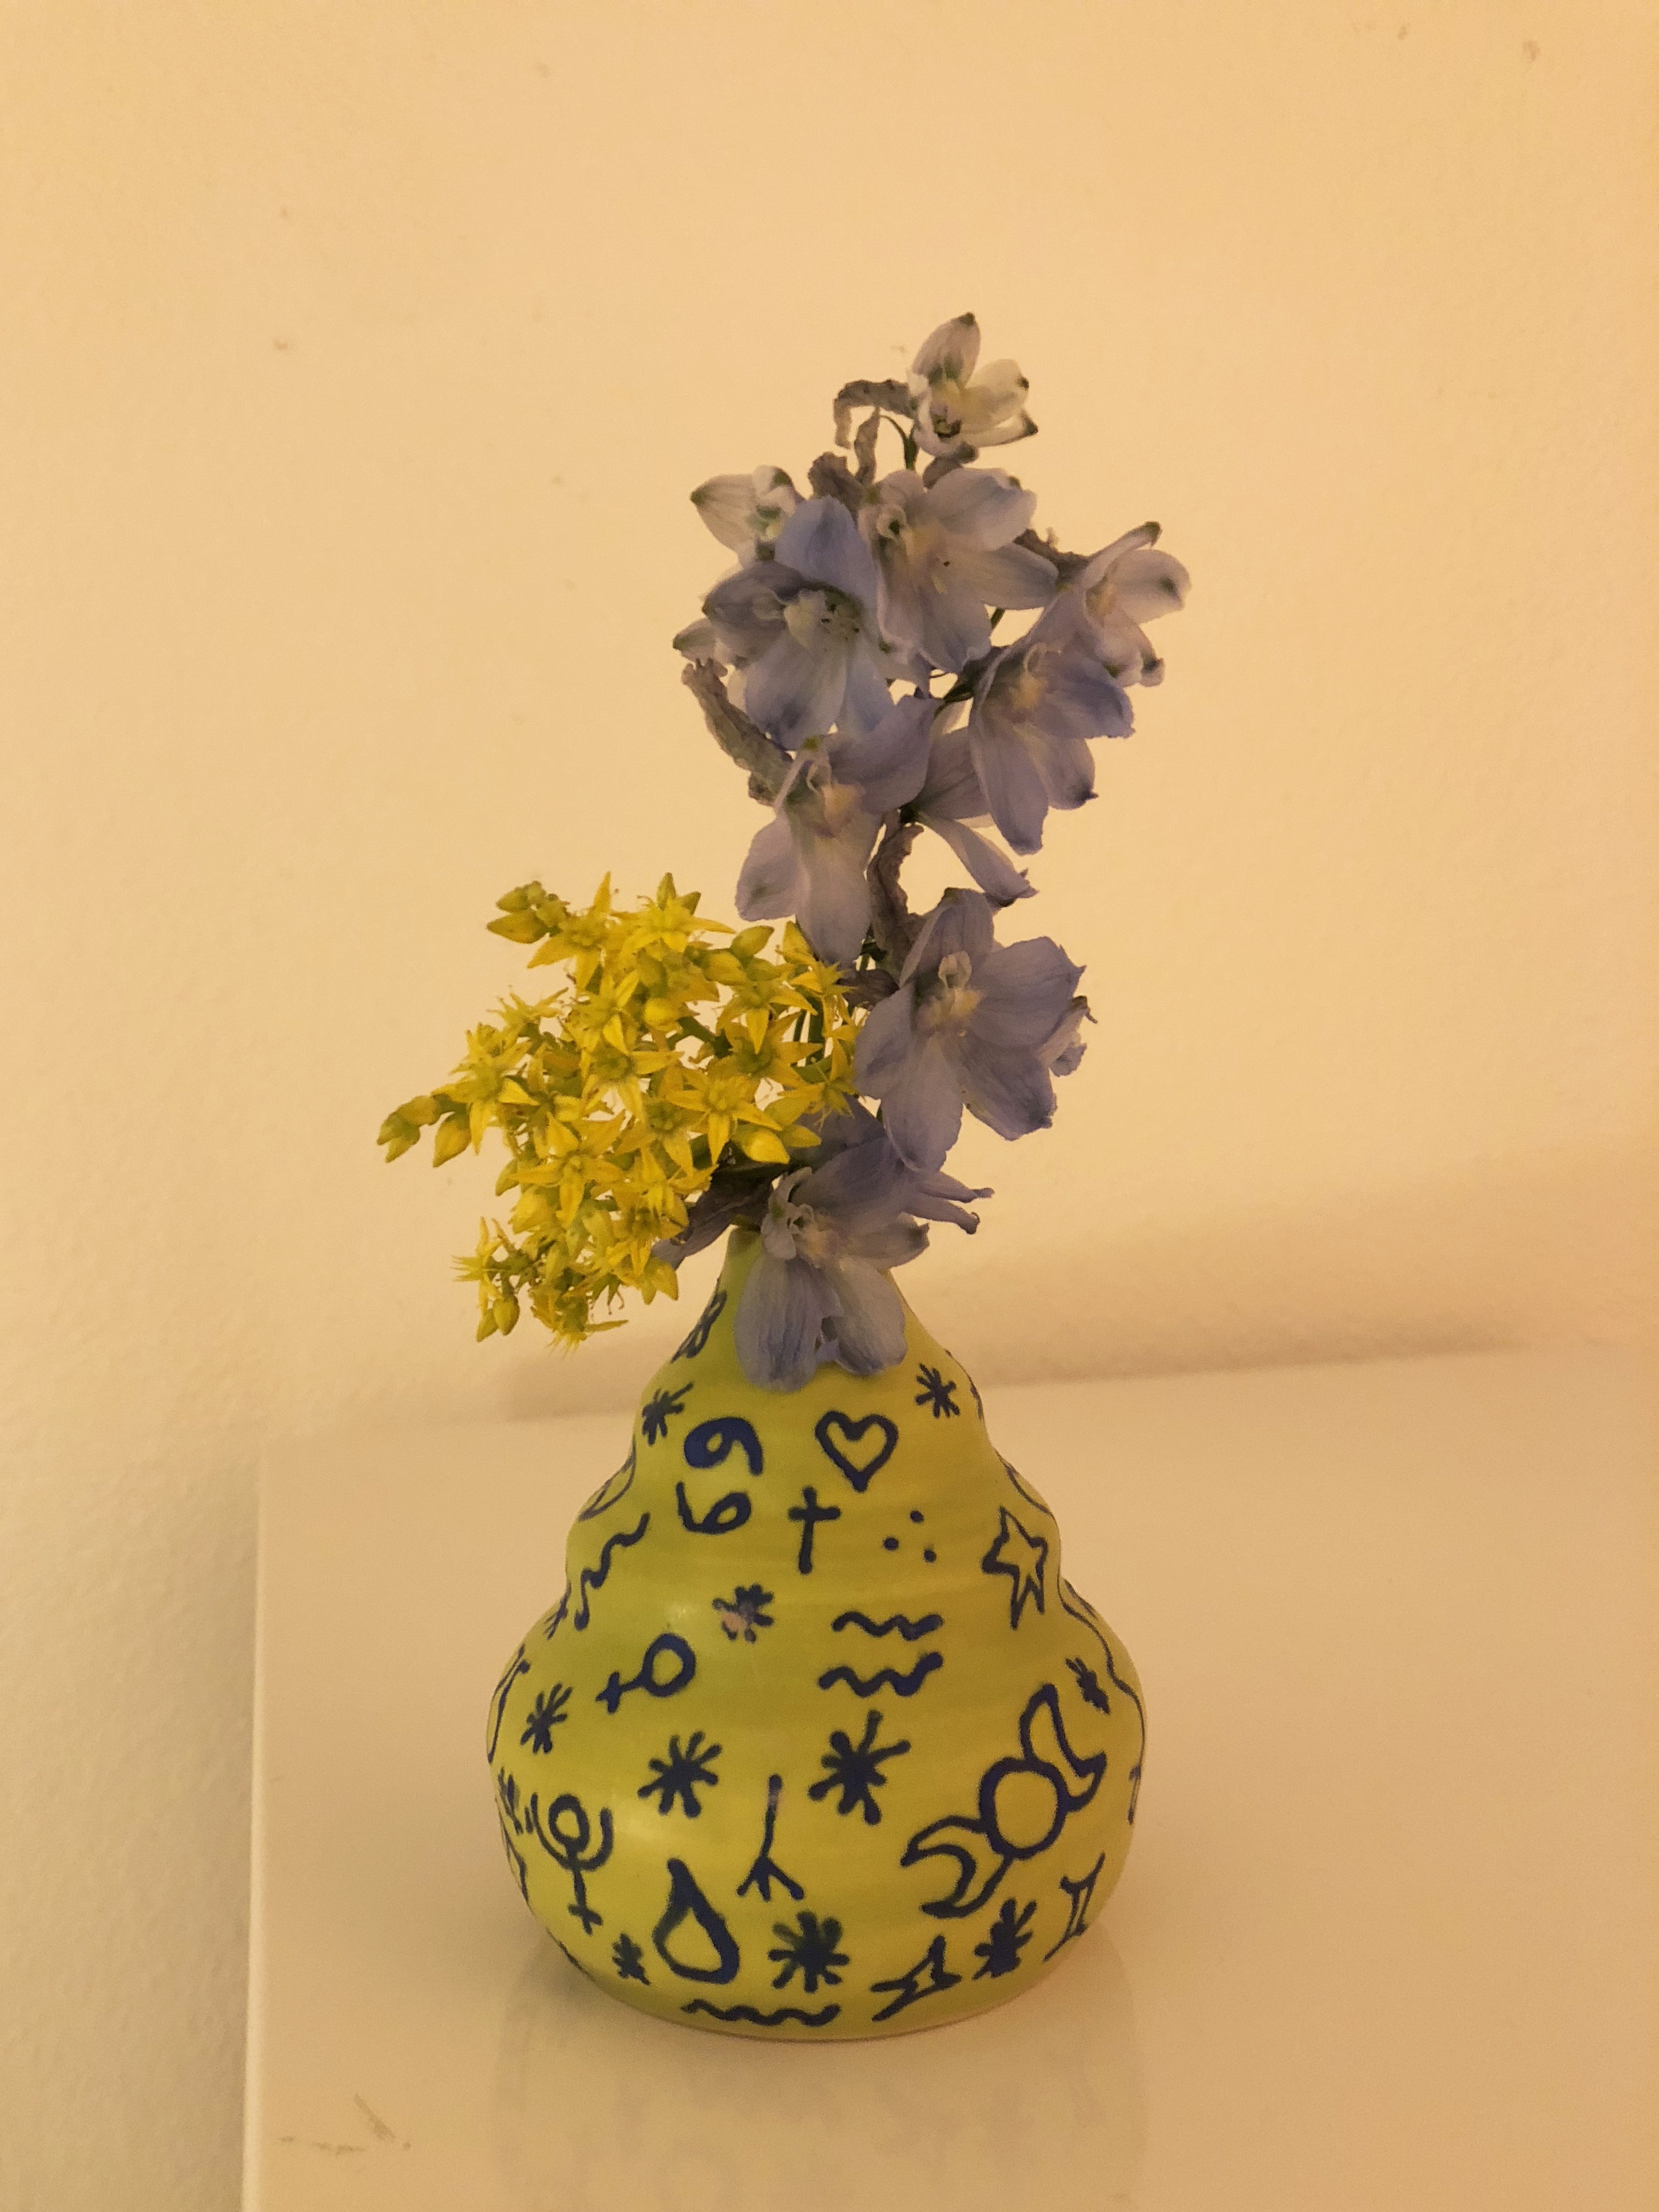 A ceramic green vase covered in drawings with blue and yellow flowers in it